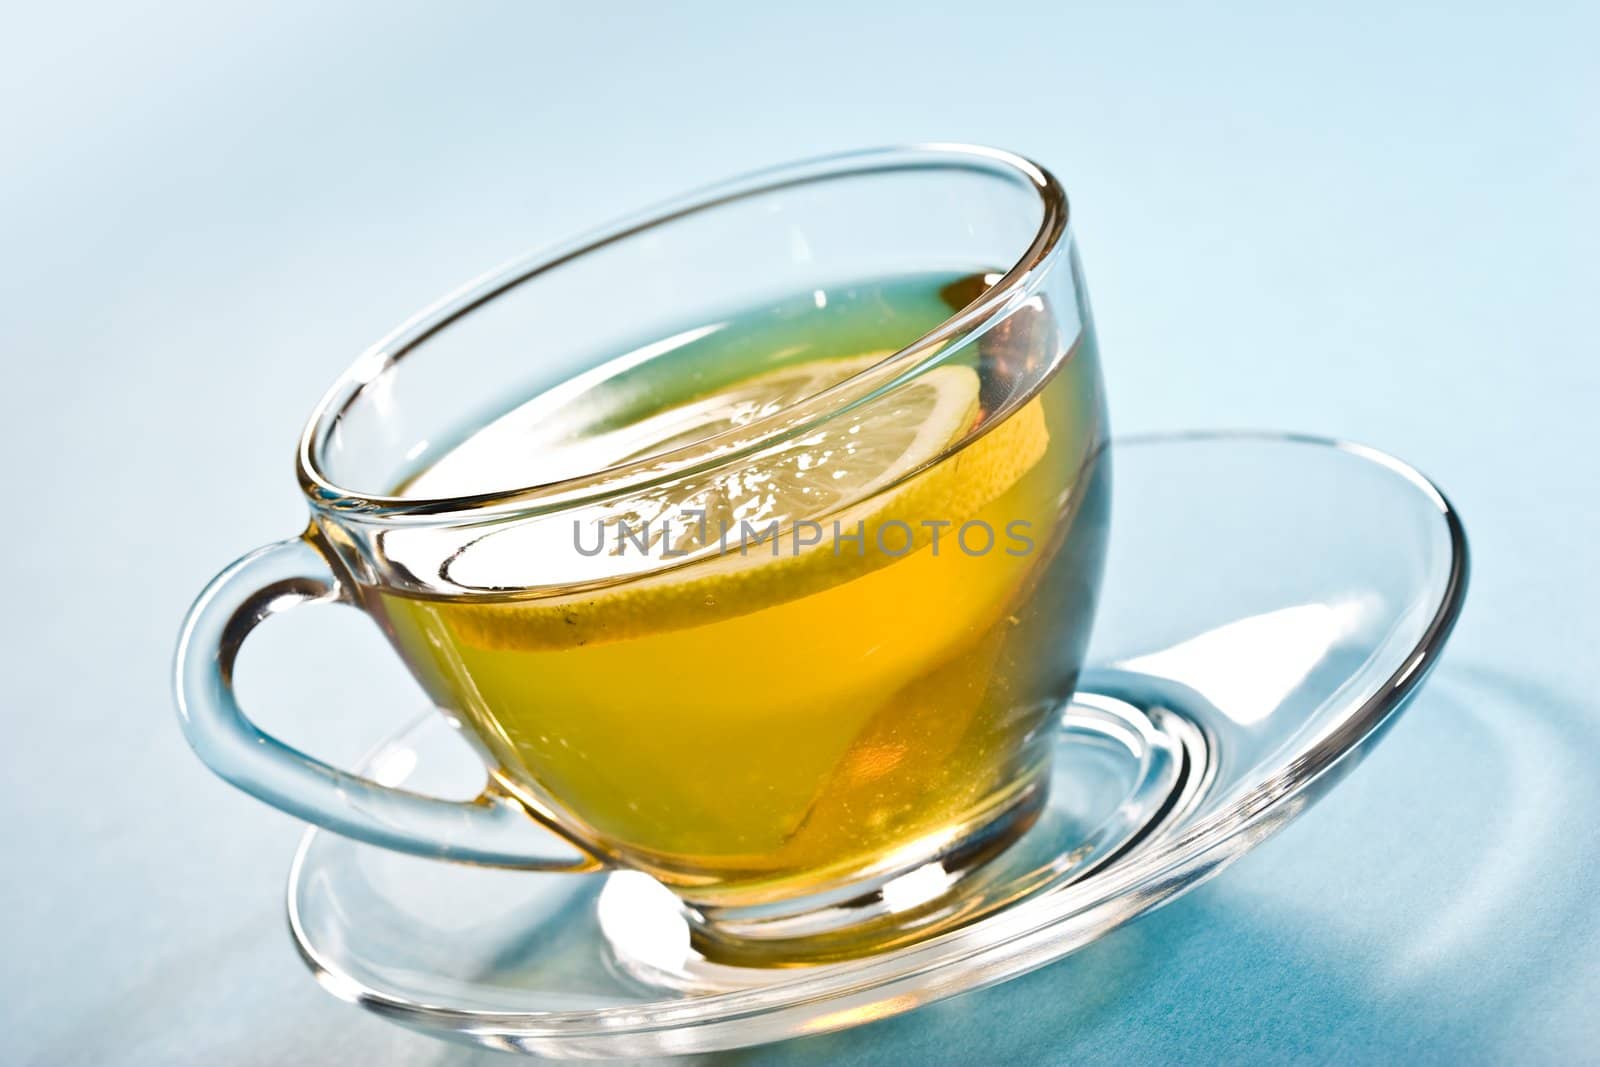 cup of tea with lemon over blue